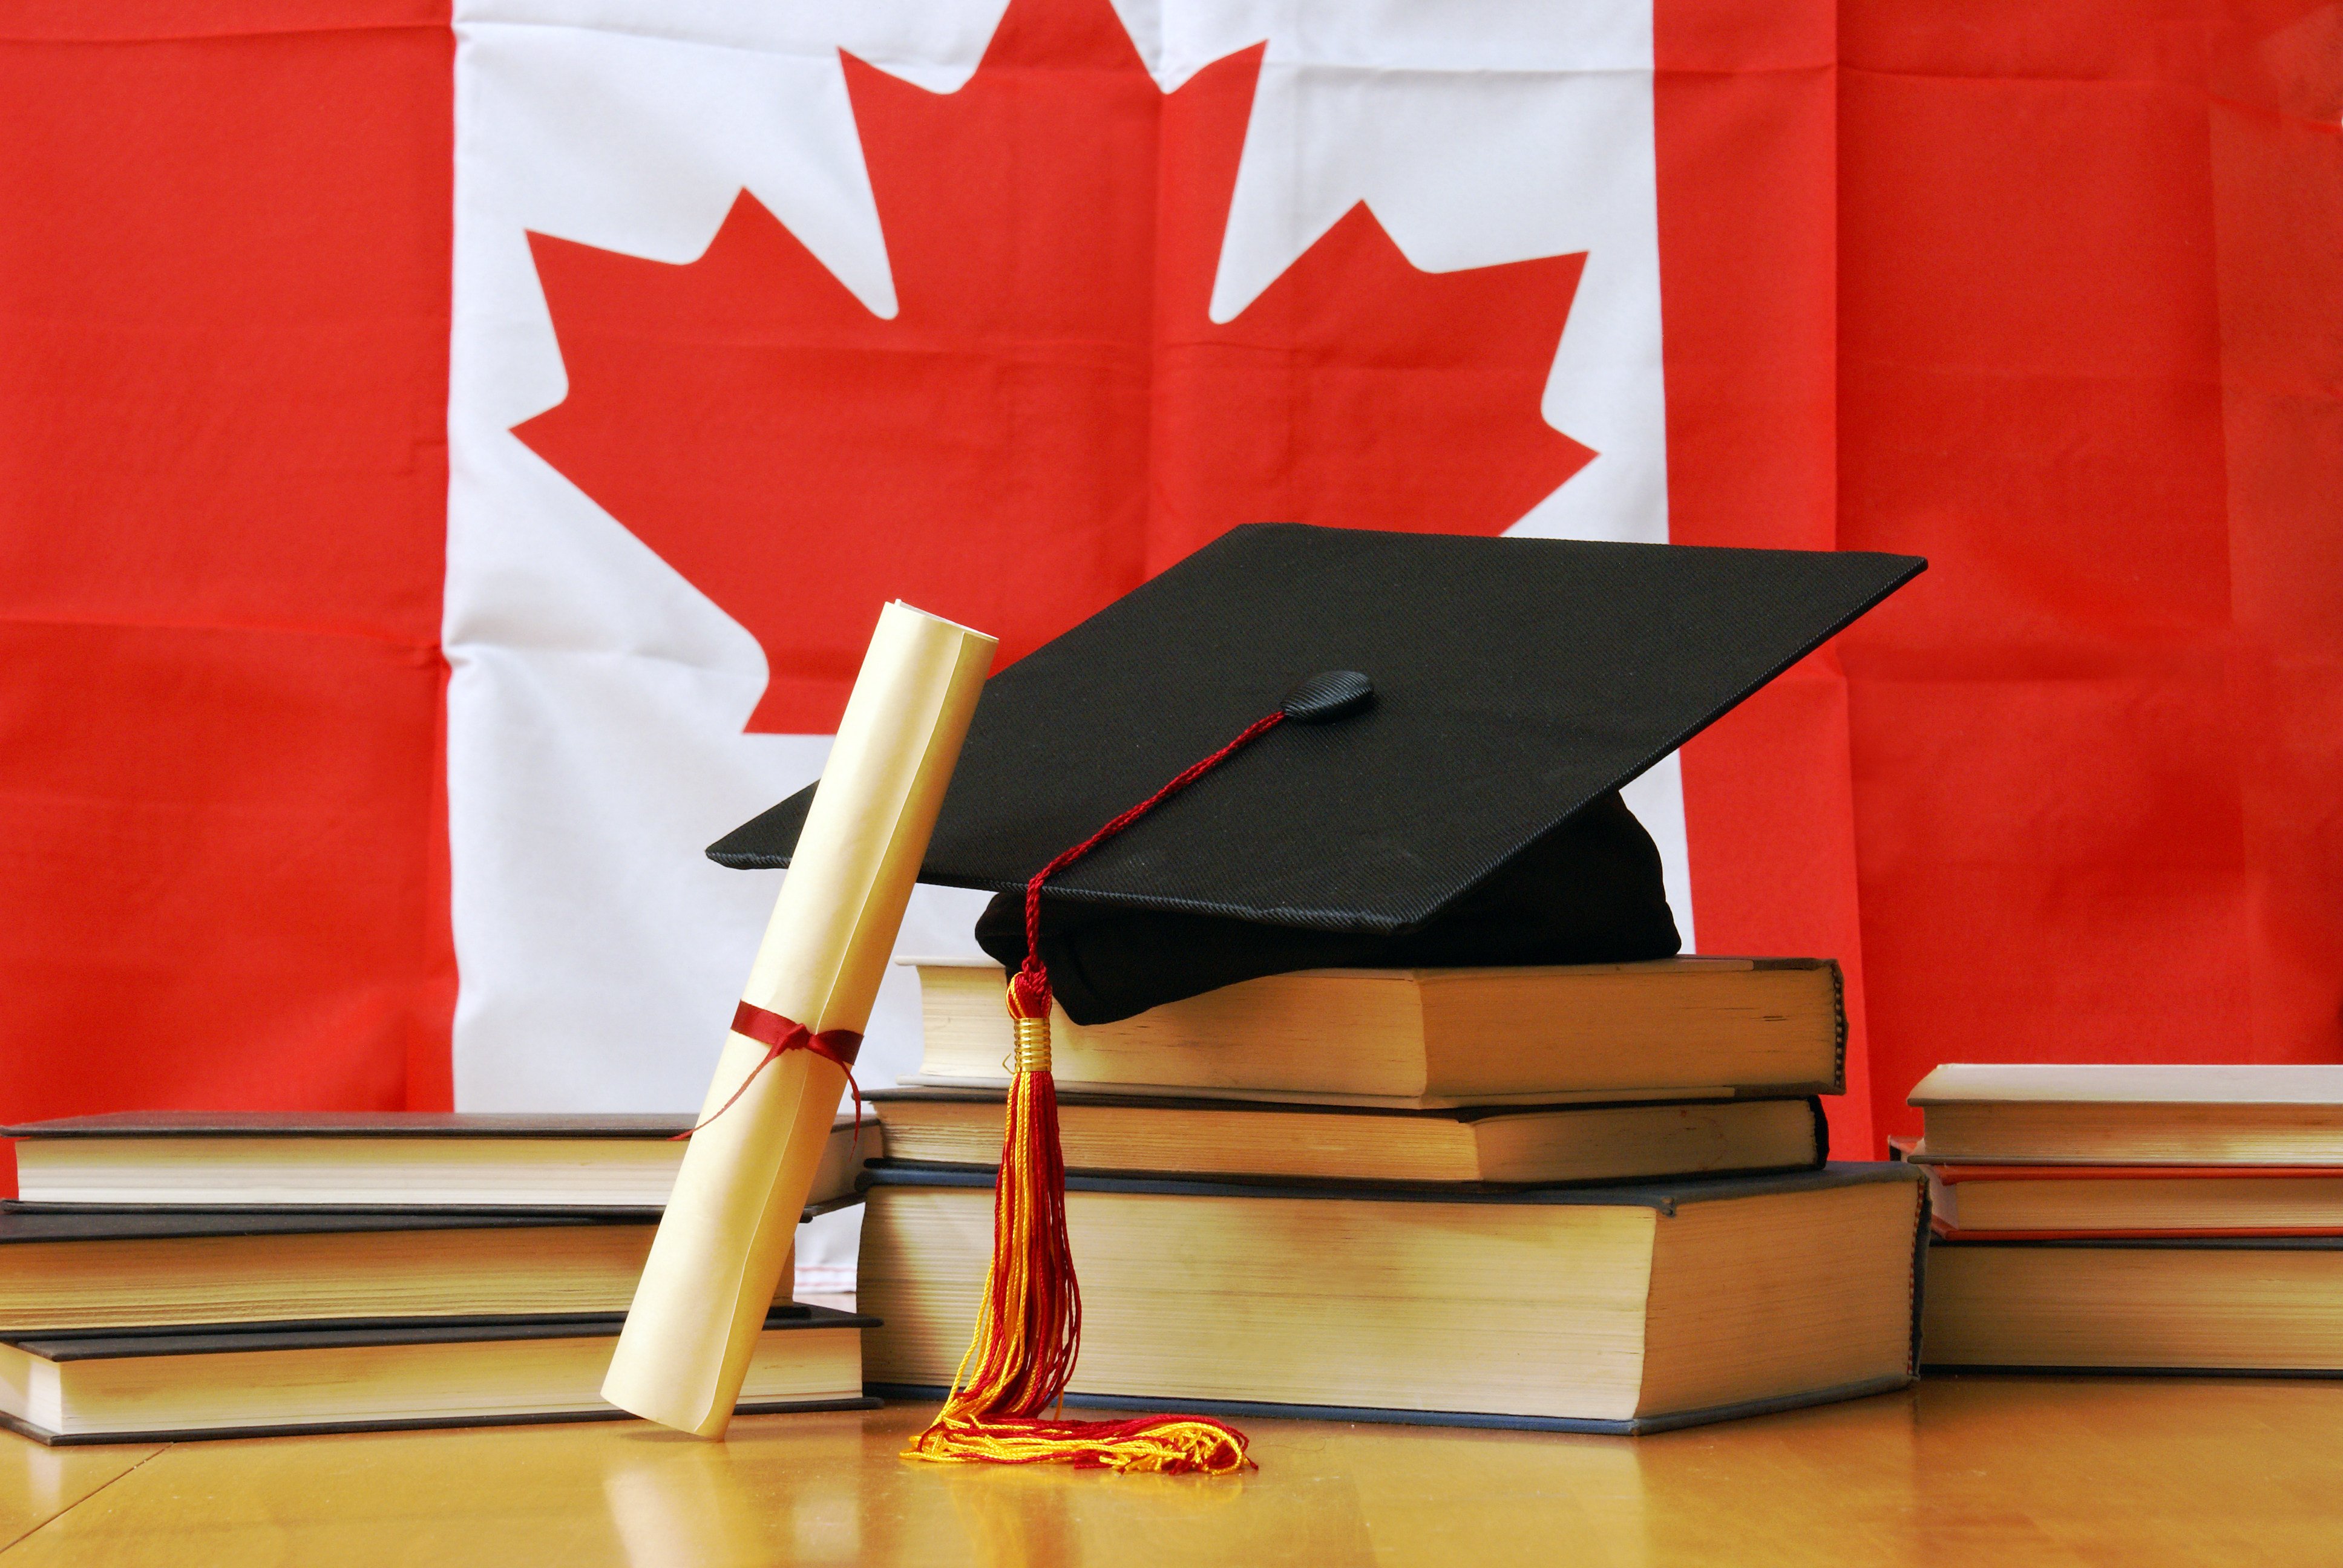 Applications for Canadian permanent residency have jumped after educational requirements were relaxed in August. Photo: Shutterstock Images